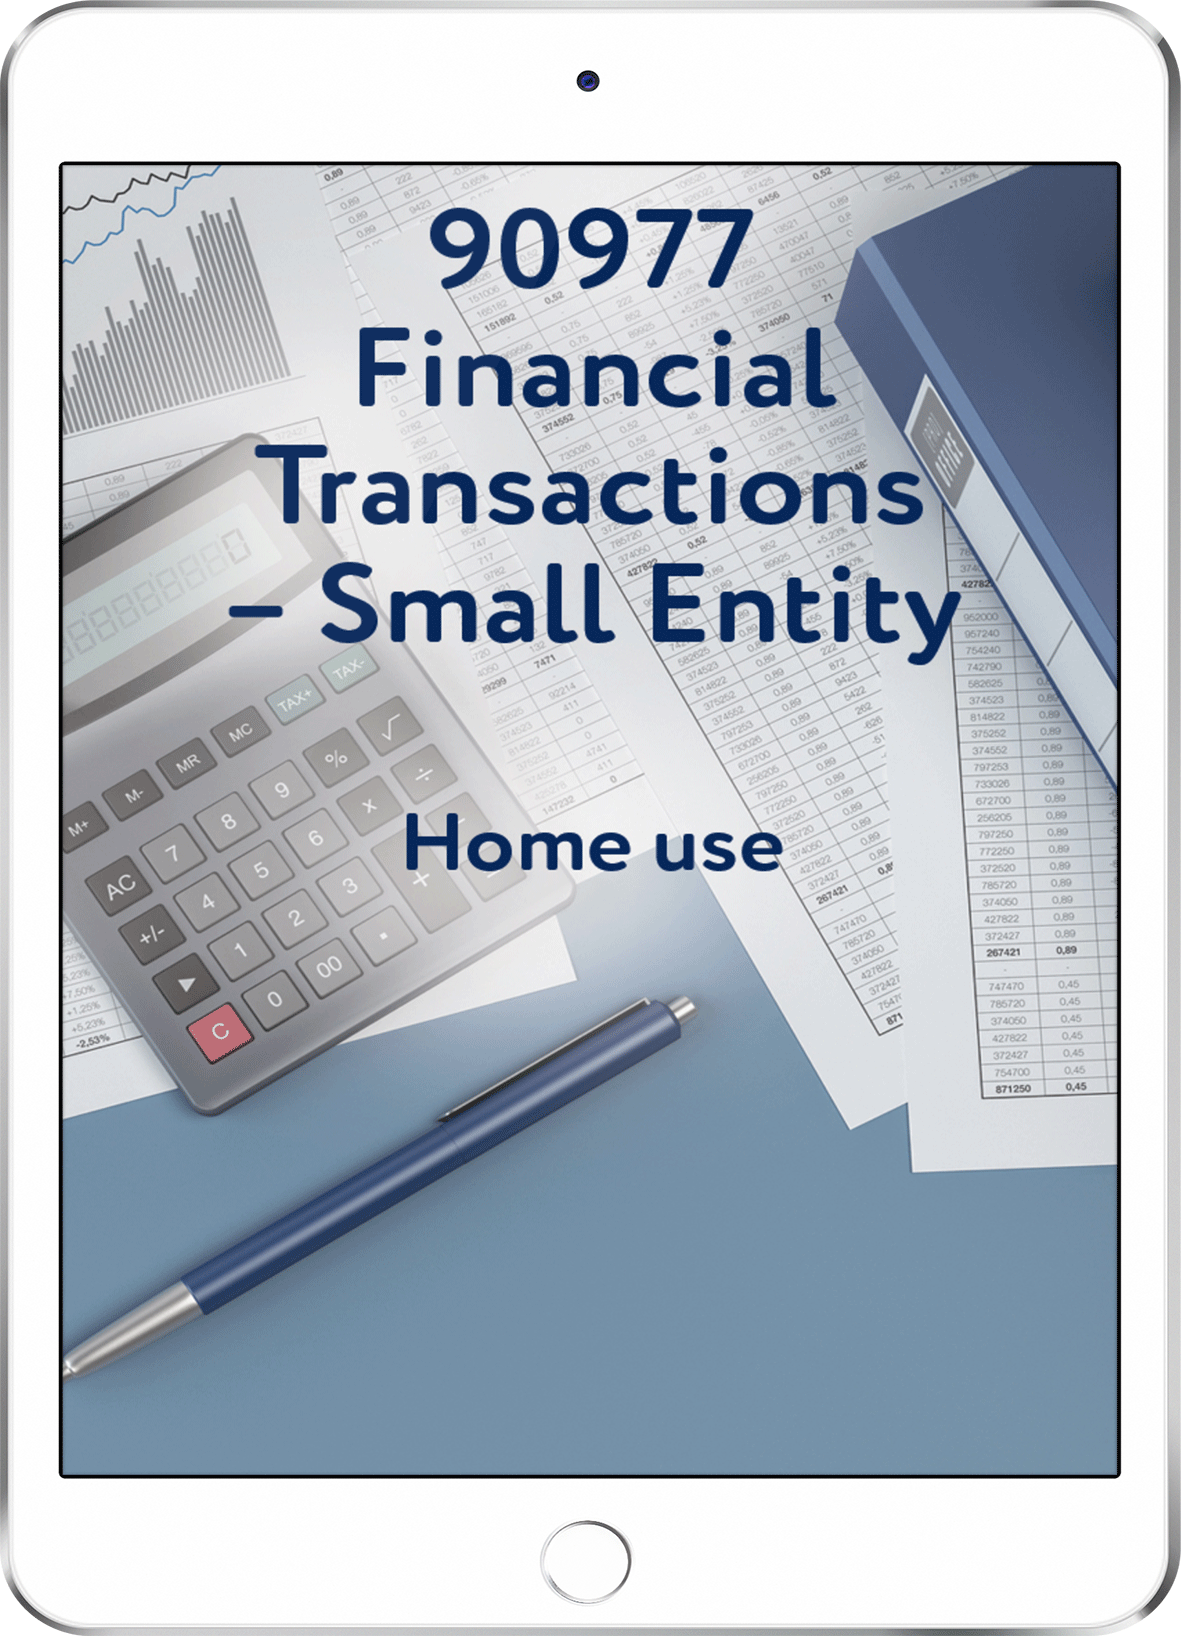 90977 Financial Transactions - Small Entity - Home Use